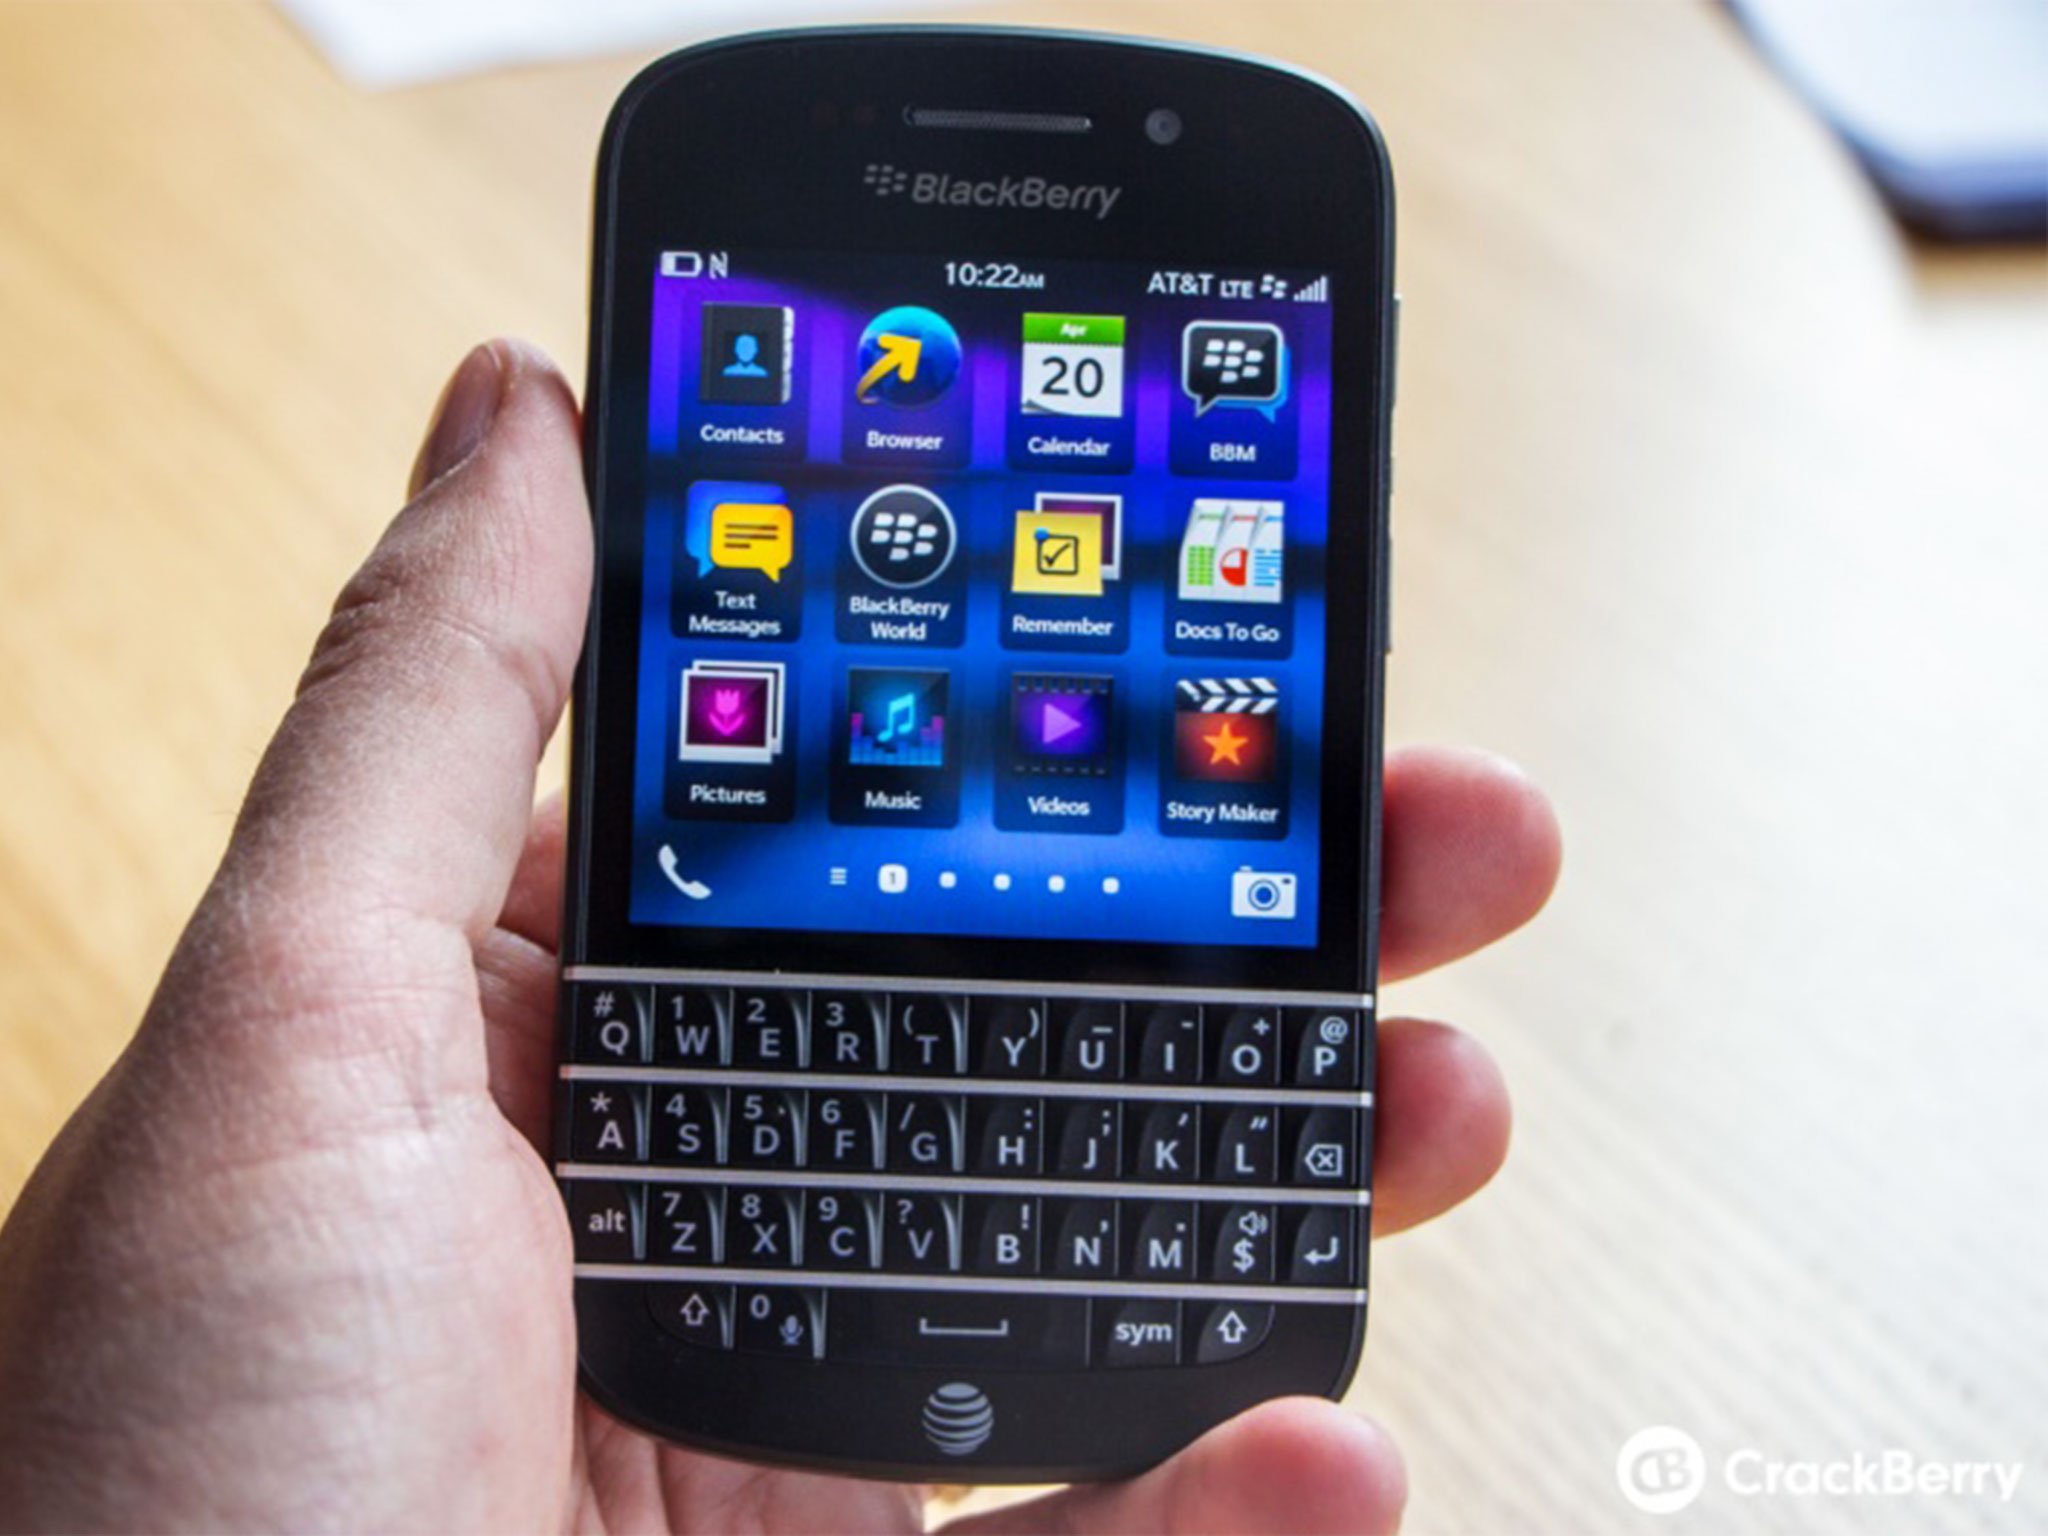 Who should get BlackBerry instead?